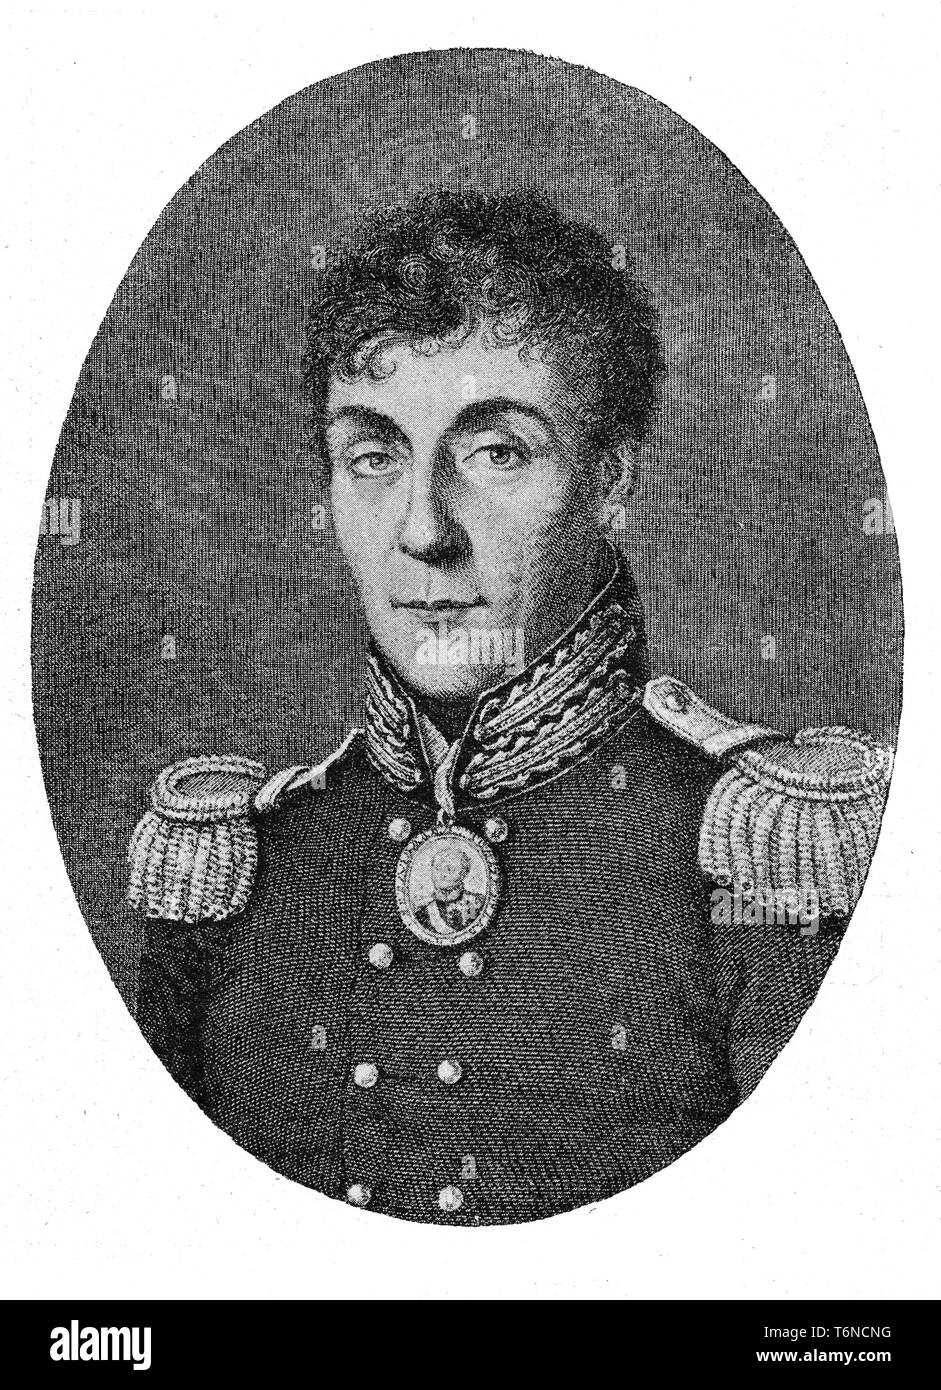 Count Alexey Arakcheev a Russian general and statesman under the reign of Alexander I. Digital improved reproduction from Illustrated overview of the life of mankind in the 19th century, 1901 edition, Marx publishing house, St. Petersburg. Stock Photo